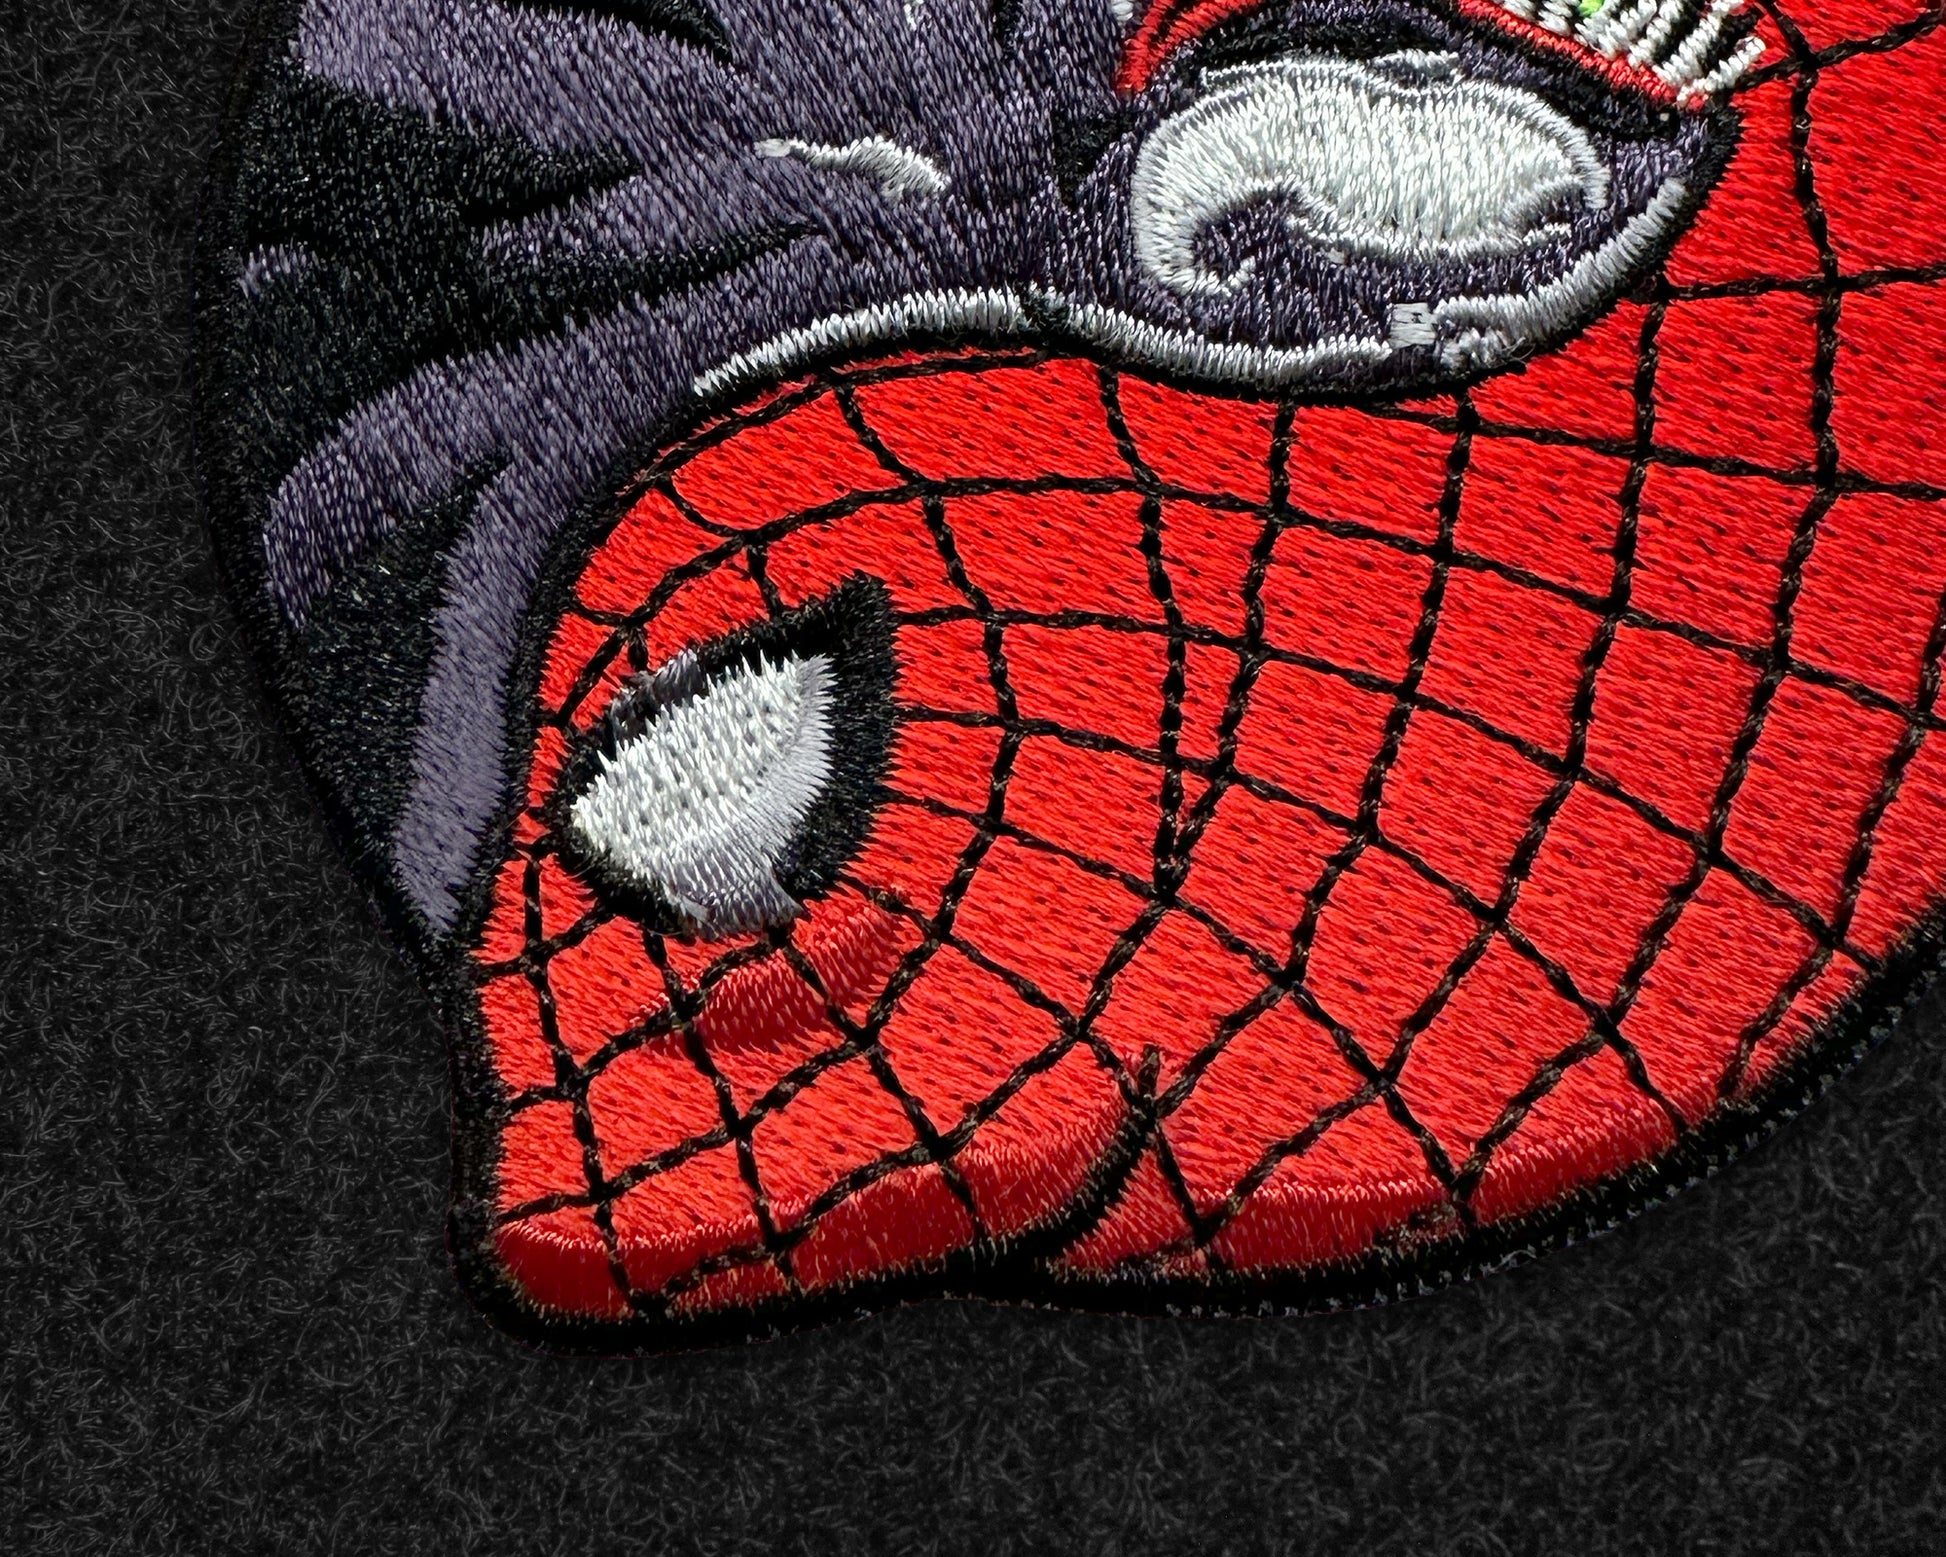 Spiderman Venom Yin Yang Iron on Patch – Patch Collection